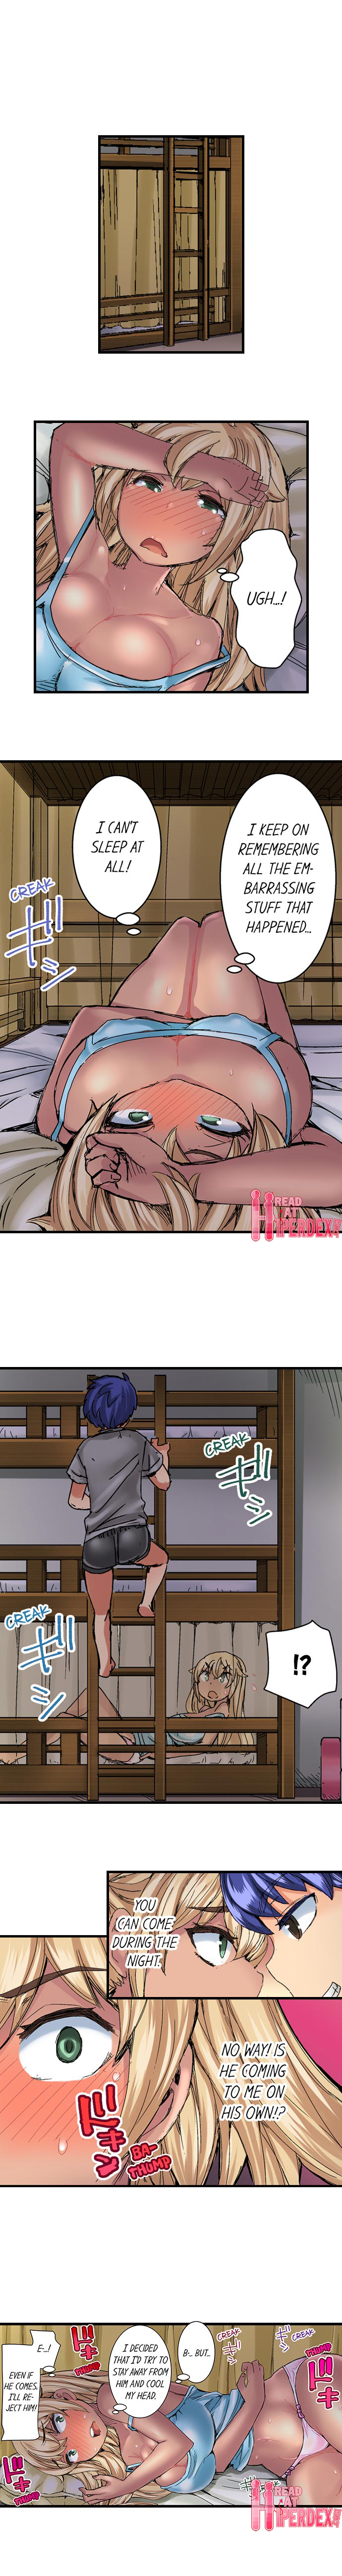 Taking a Hot Tanned Chick’s Virginity - Chapter 25 Page 9